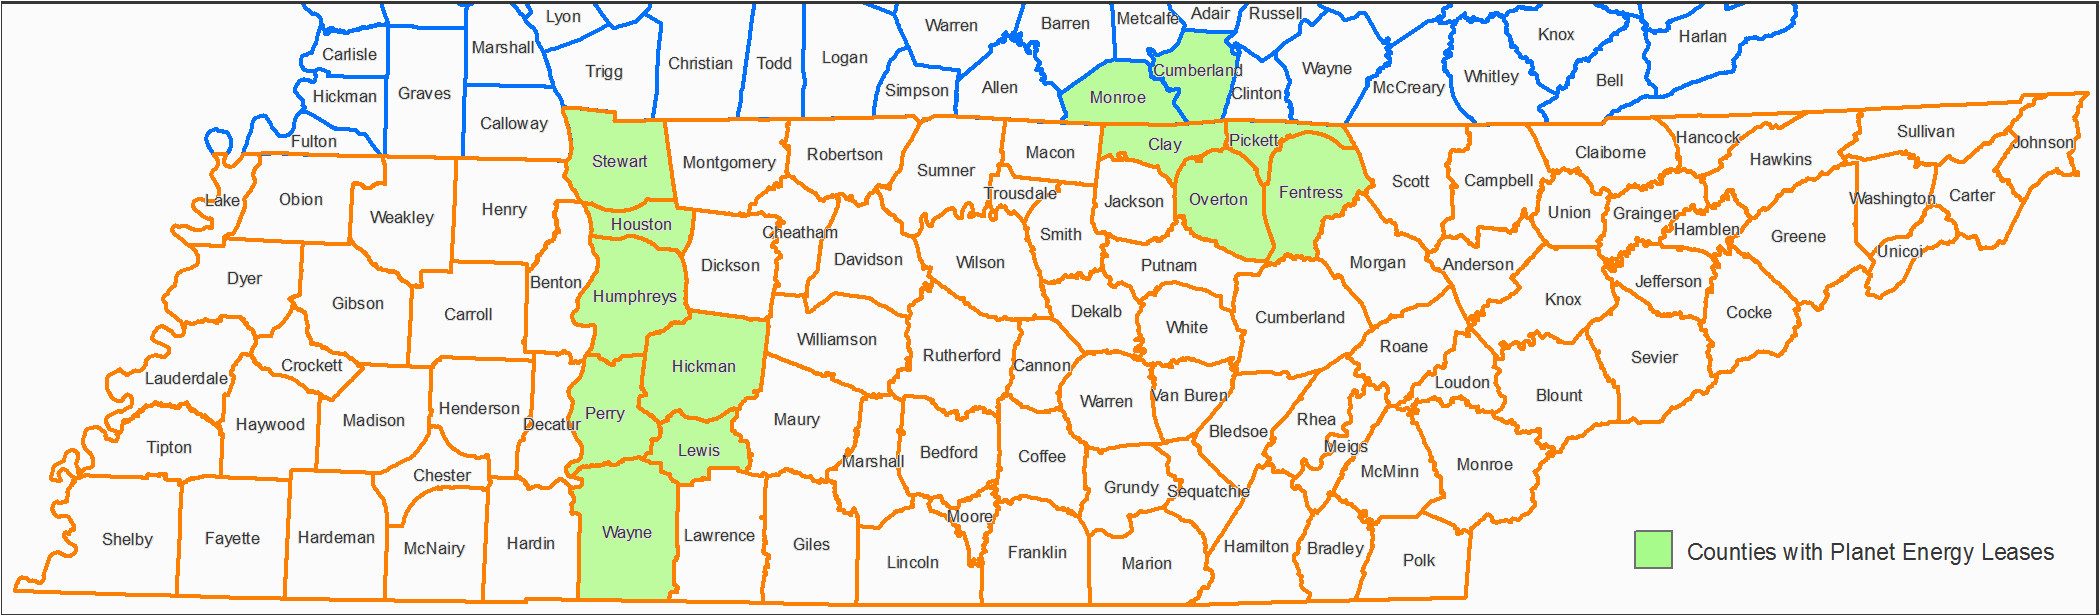 map of tennesse and kentucky and travel information download free